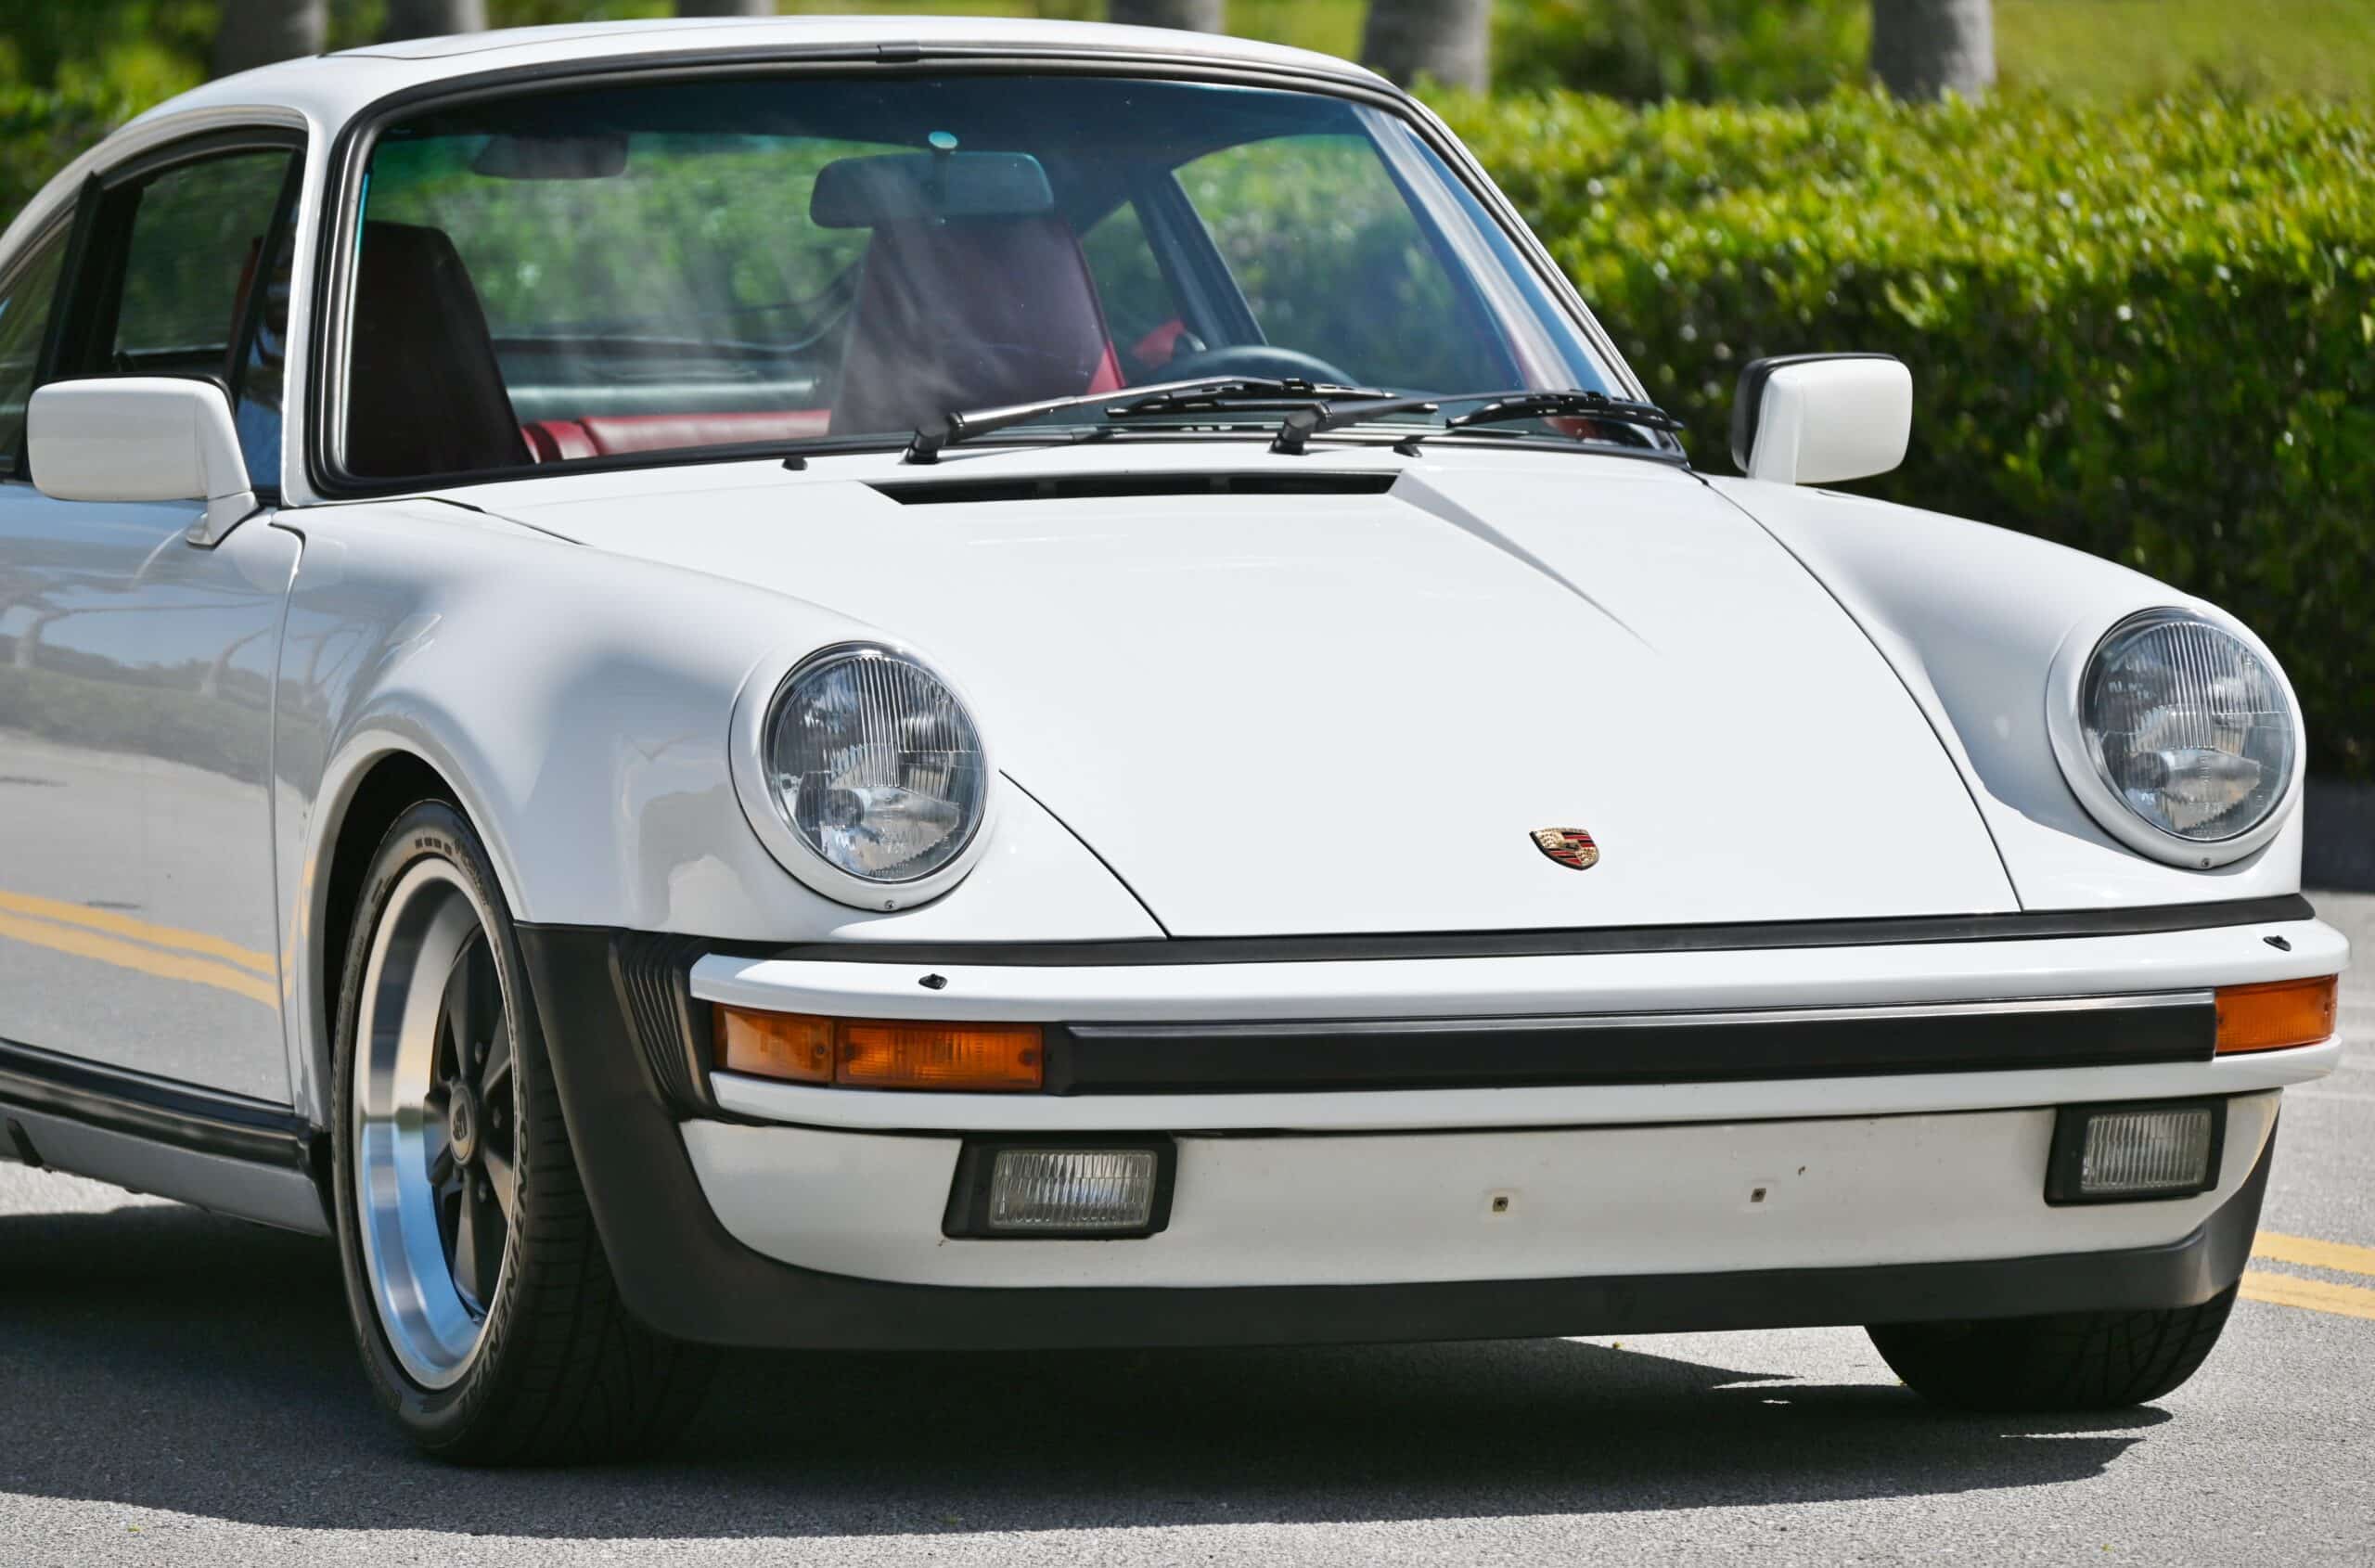 1986 Porsche 911 930 Turbo Showroom Condition-Only 40k Miles-Rare Color Combo-Matching numbers – Unrestored